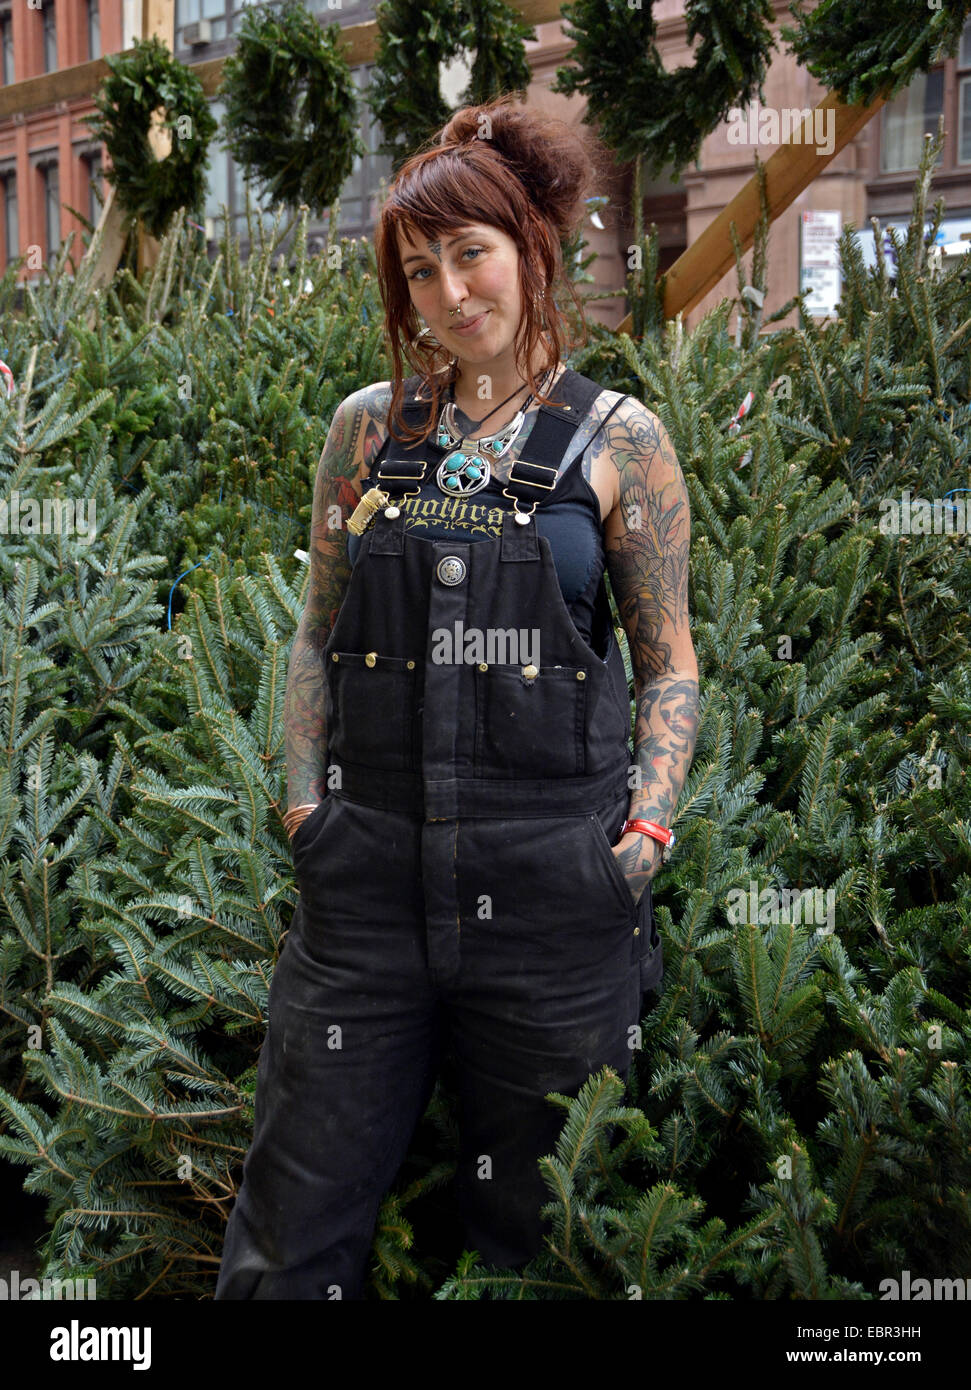 Portrait of a pretty young lady with tattoos from Scotland  selling Christmas trees in Greenwich Village, New York City Stock Photo